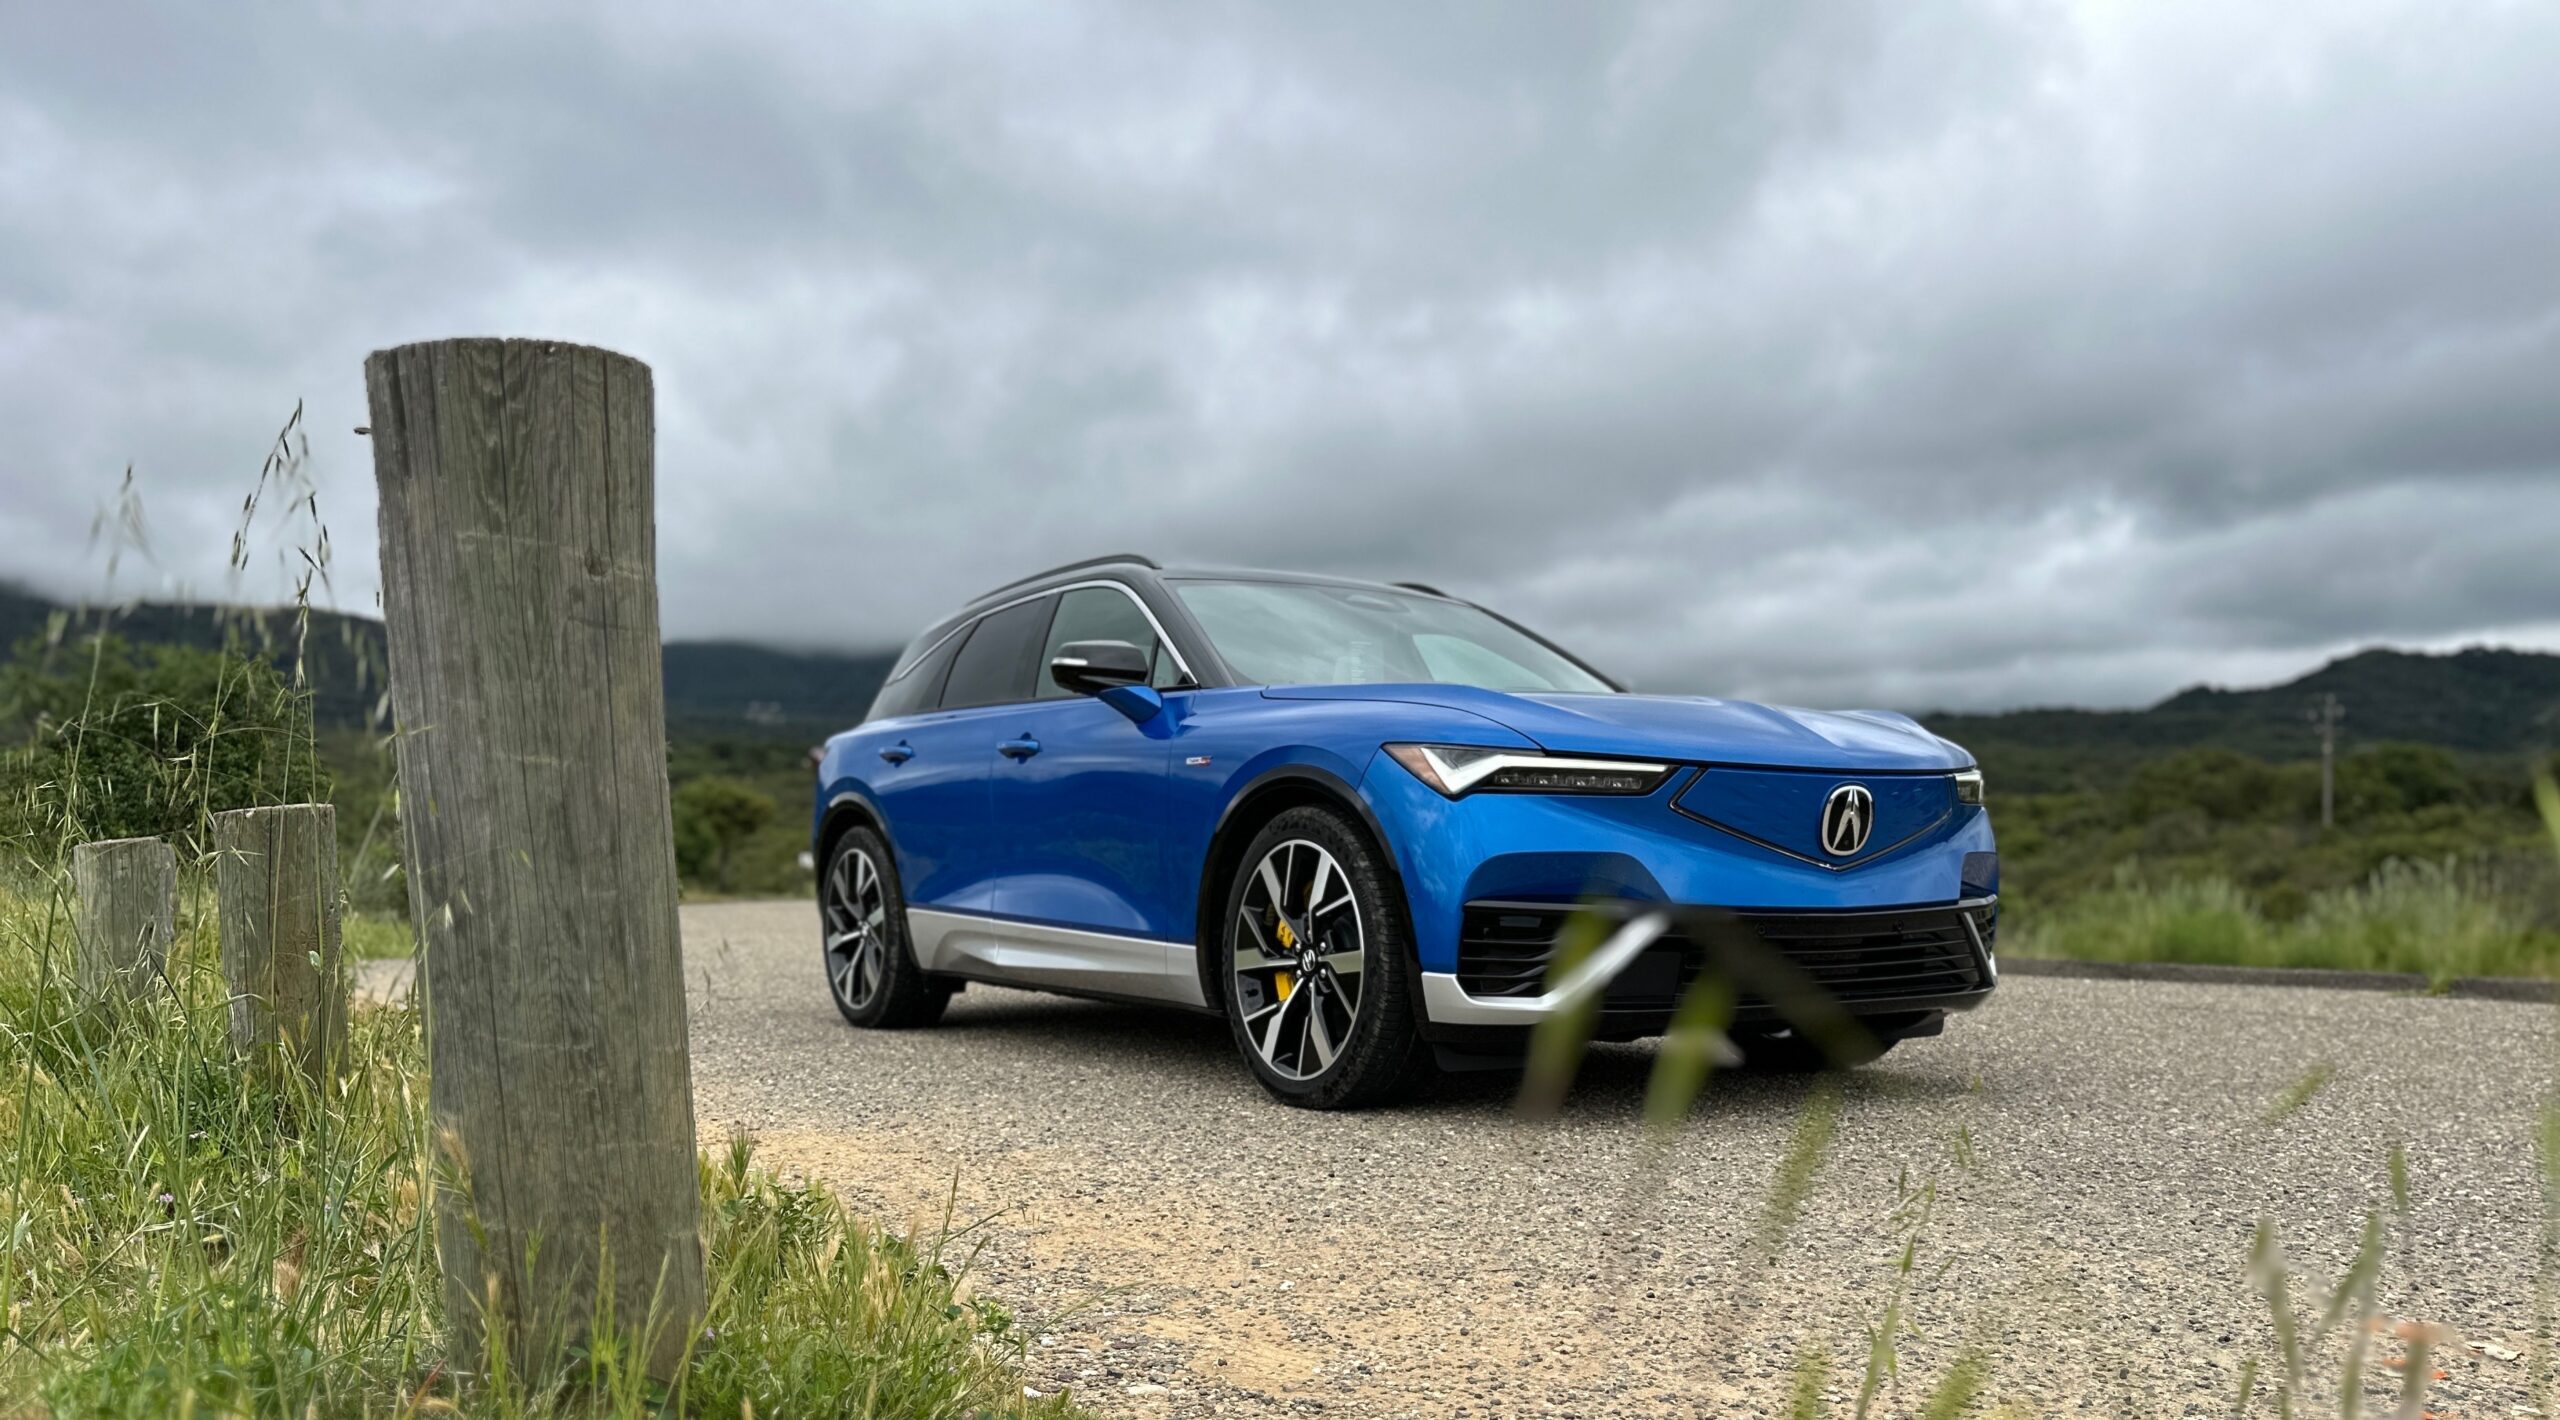 Take a ride in Acura’s first EV, its most powerful SUV yet